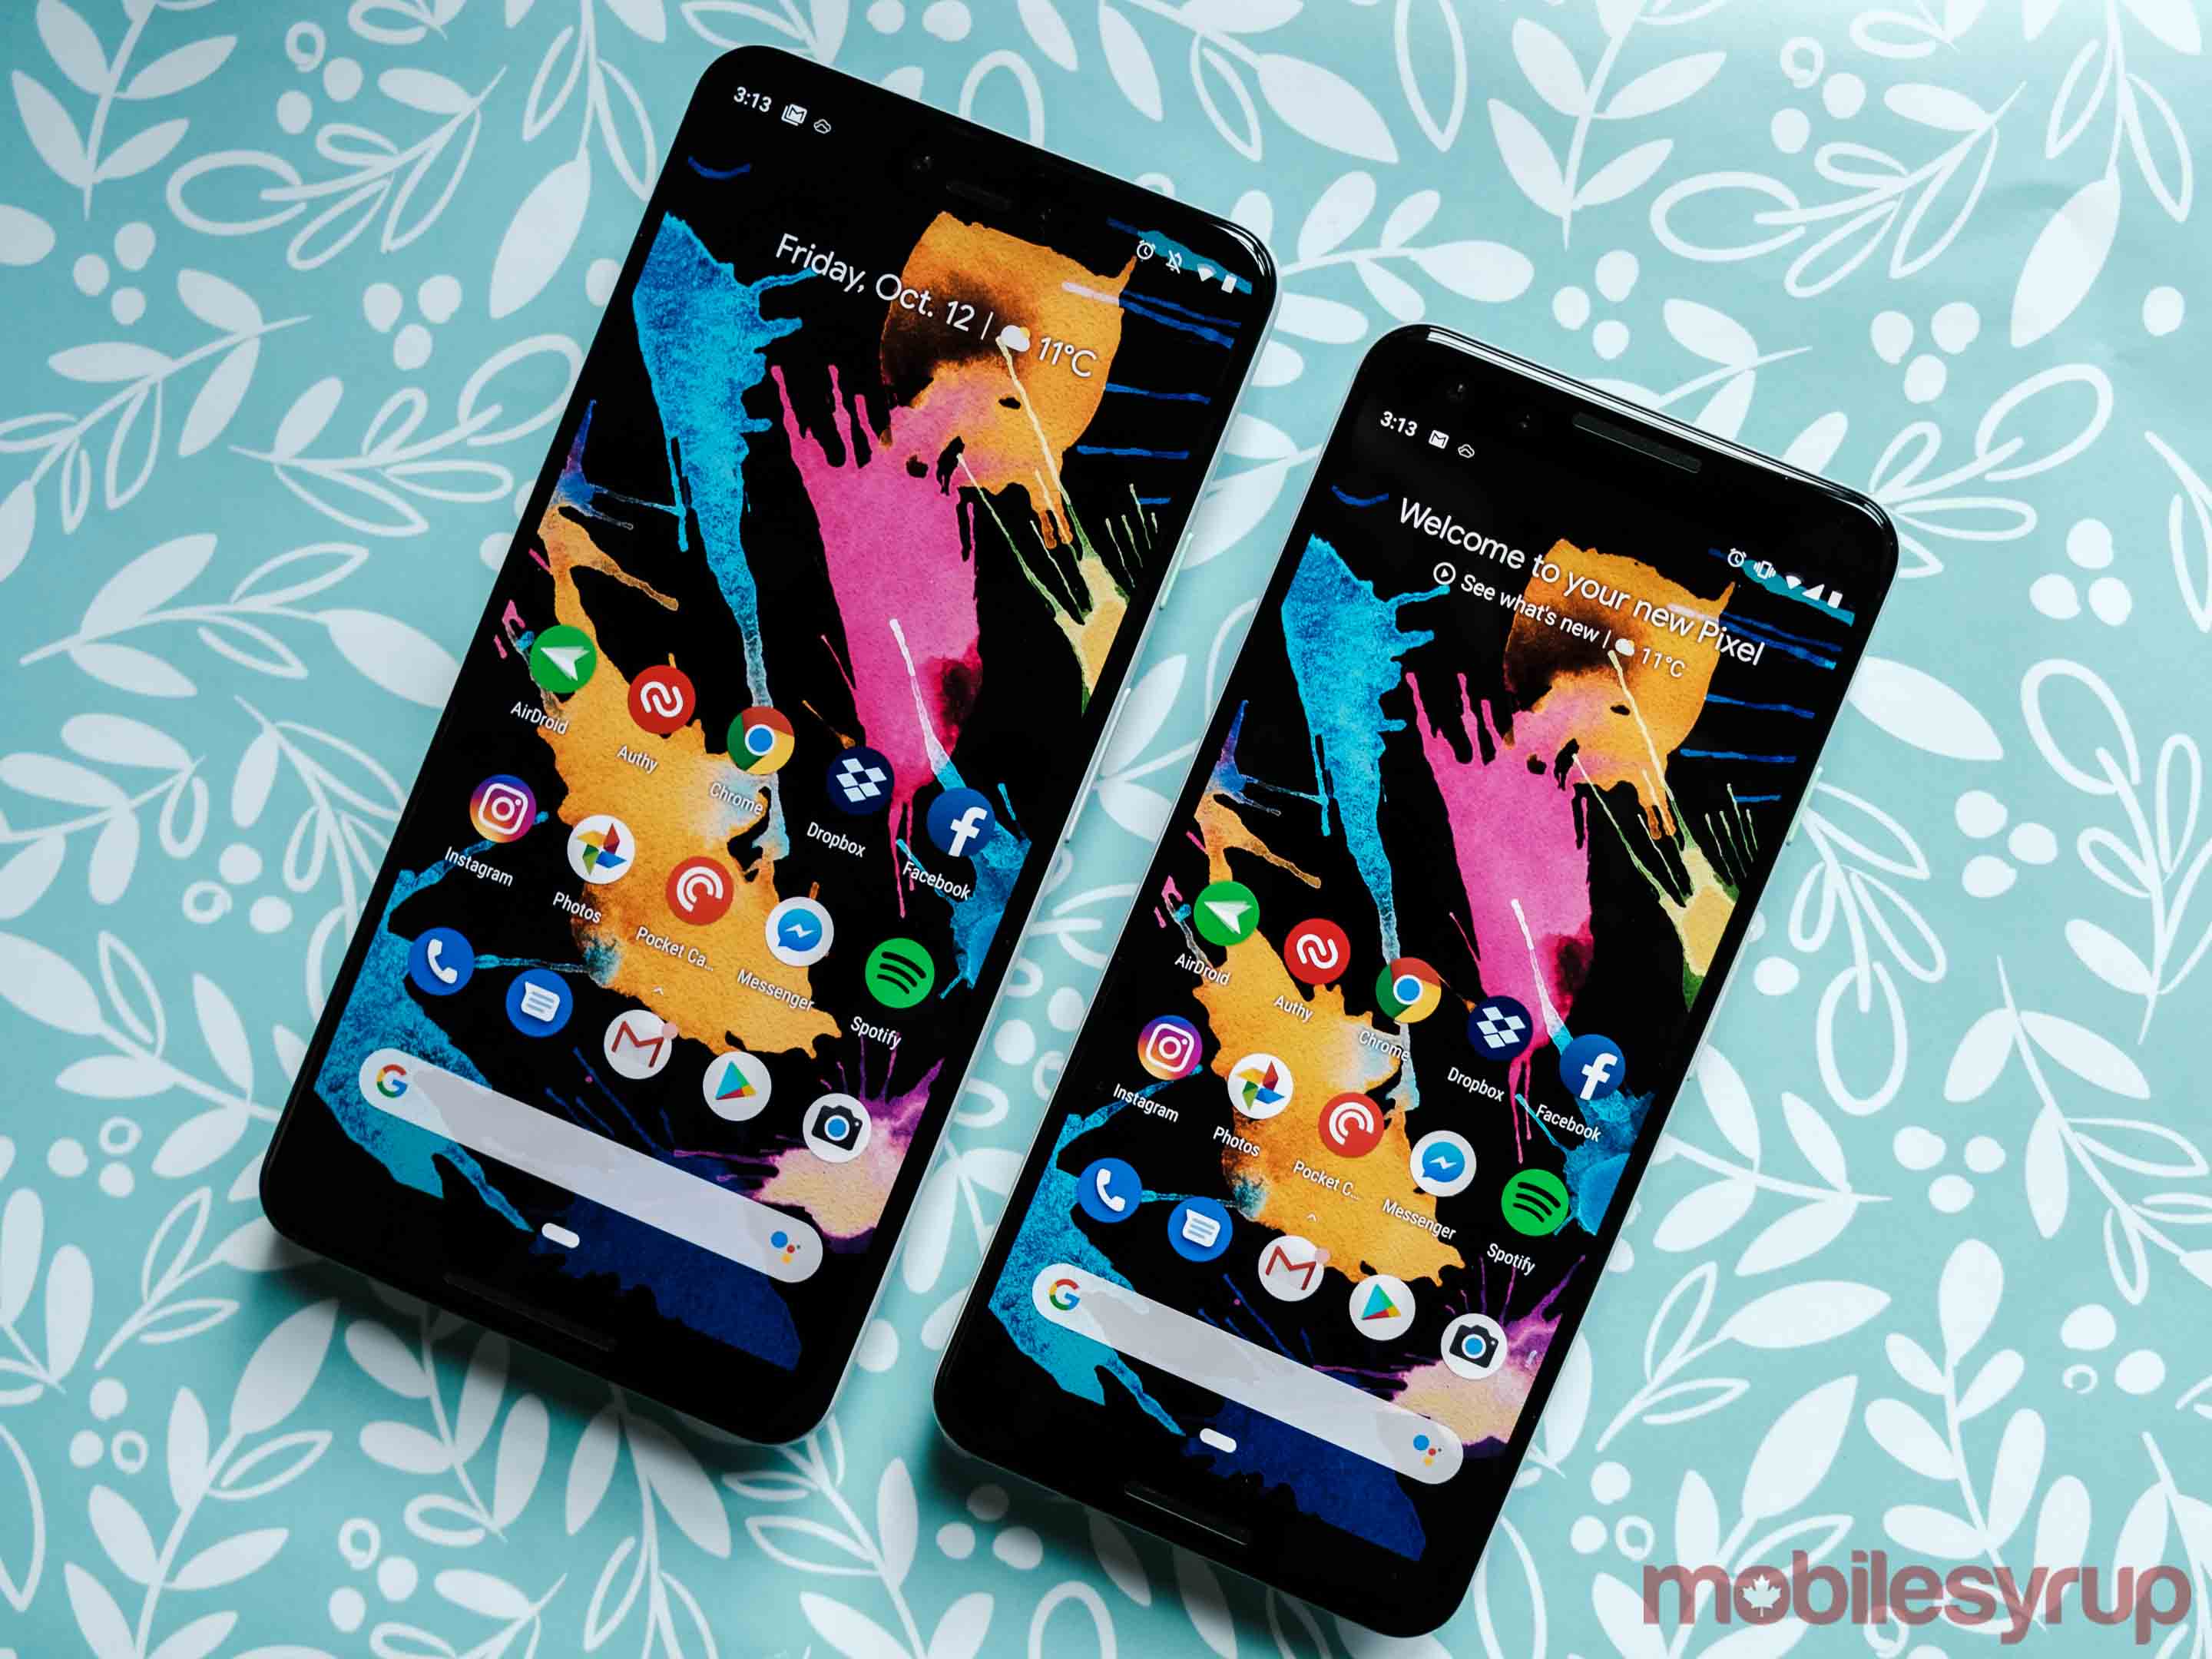 Both the Pixel 3 and Pixel 3 XL feature much improved OLED displays